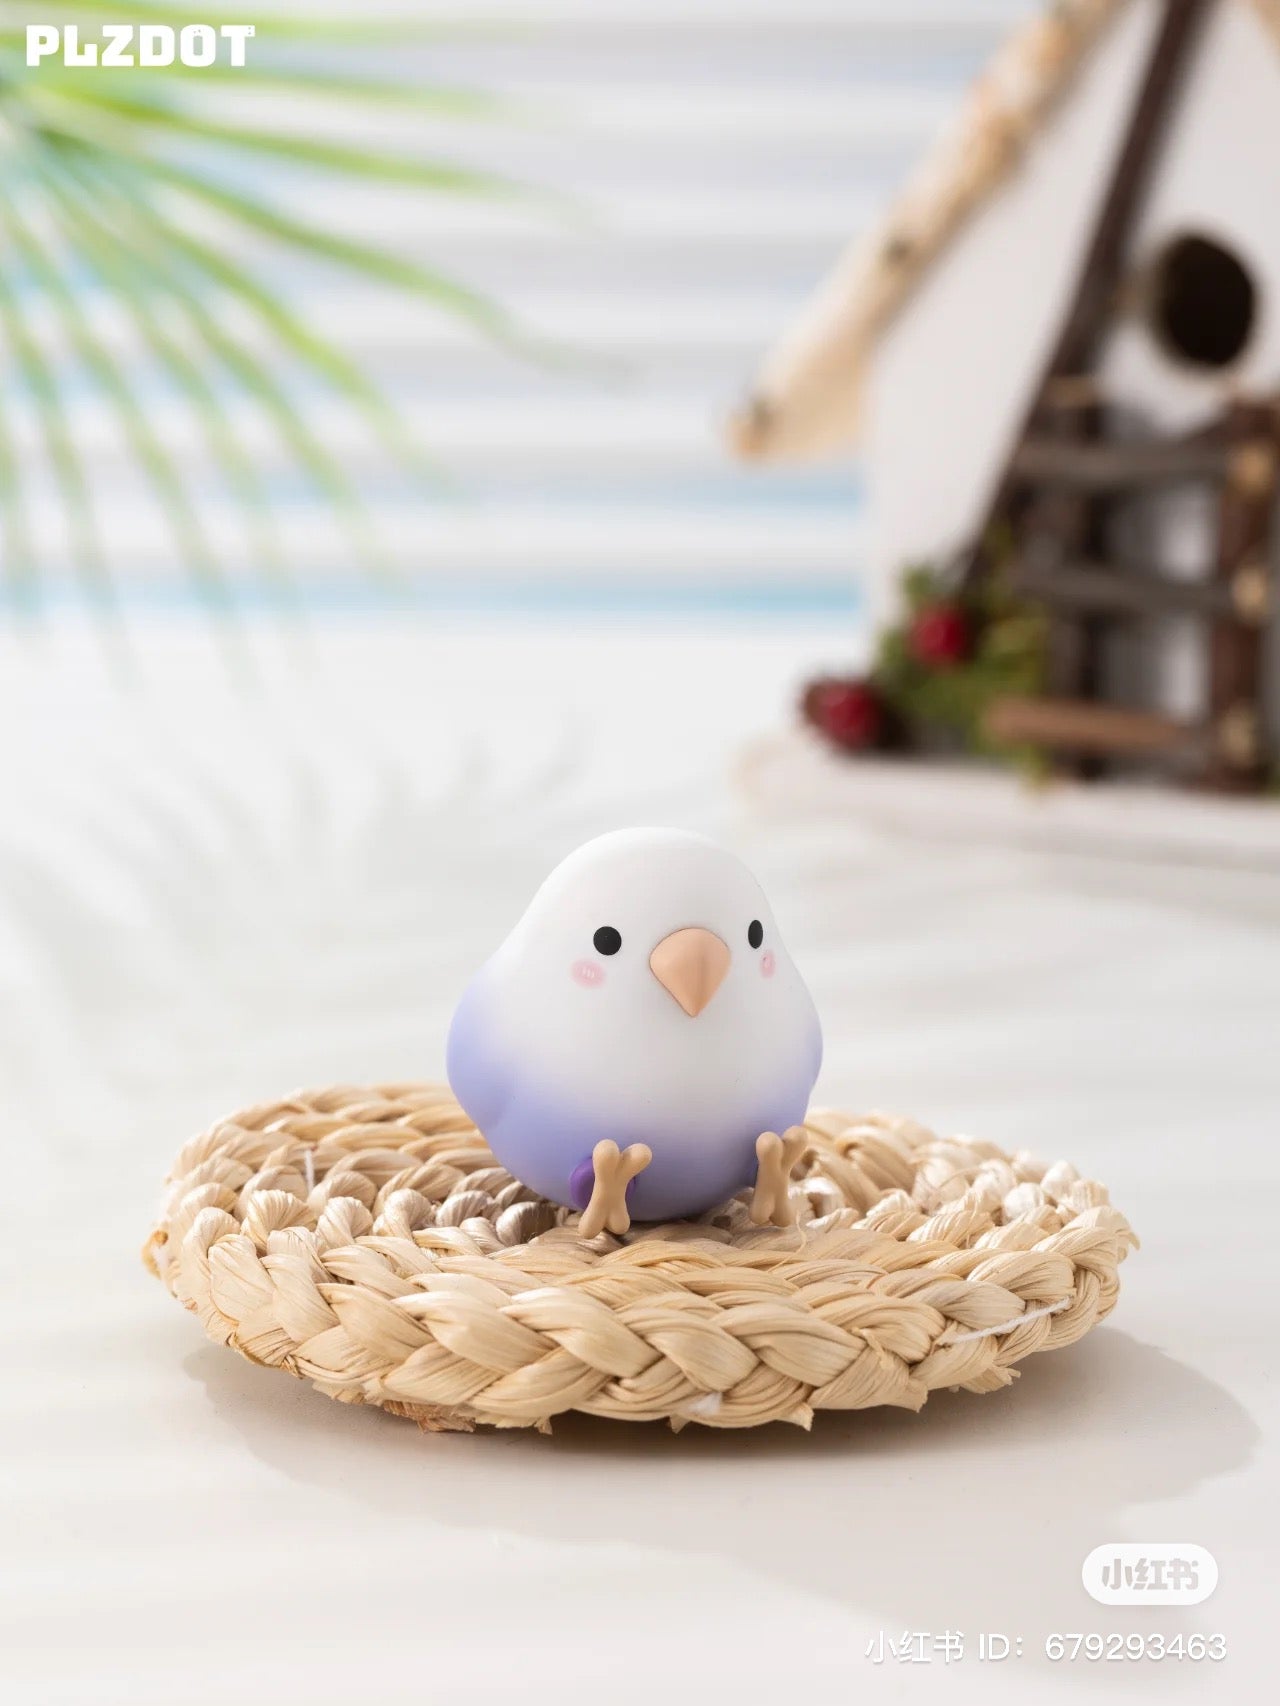 A blind box series featuring Love Bird Mini toys on a straw surface, a toy bone, and a birdhouse. Preorder now from Strangecat Toys for a surprise design in each box.